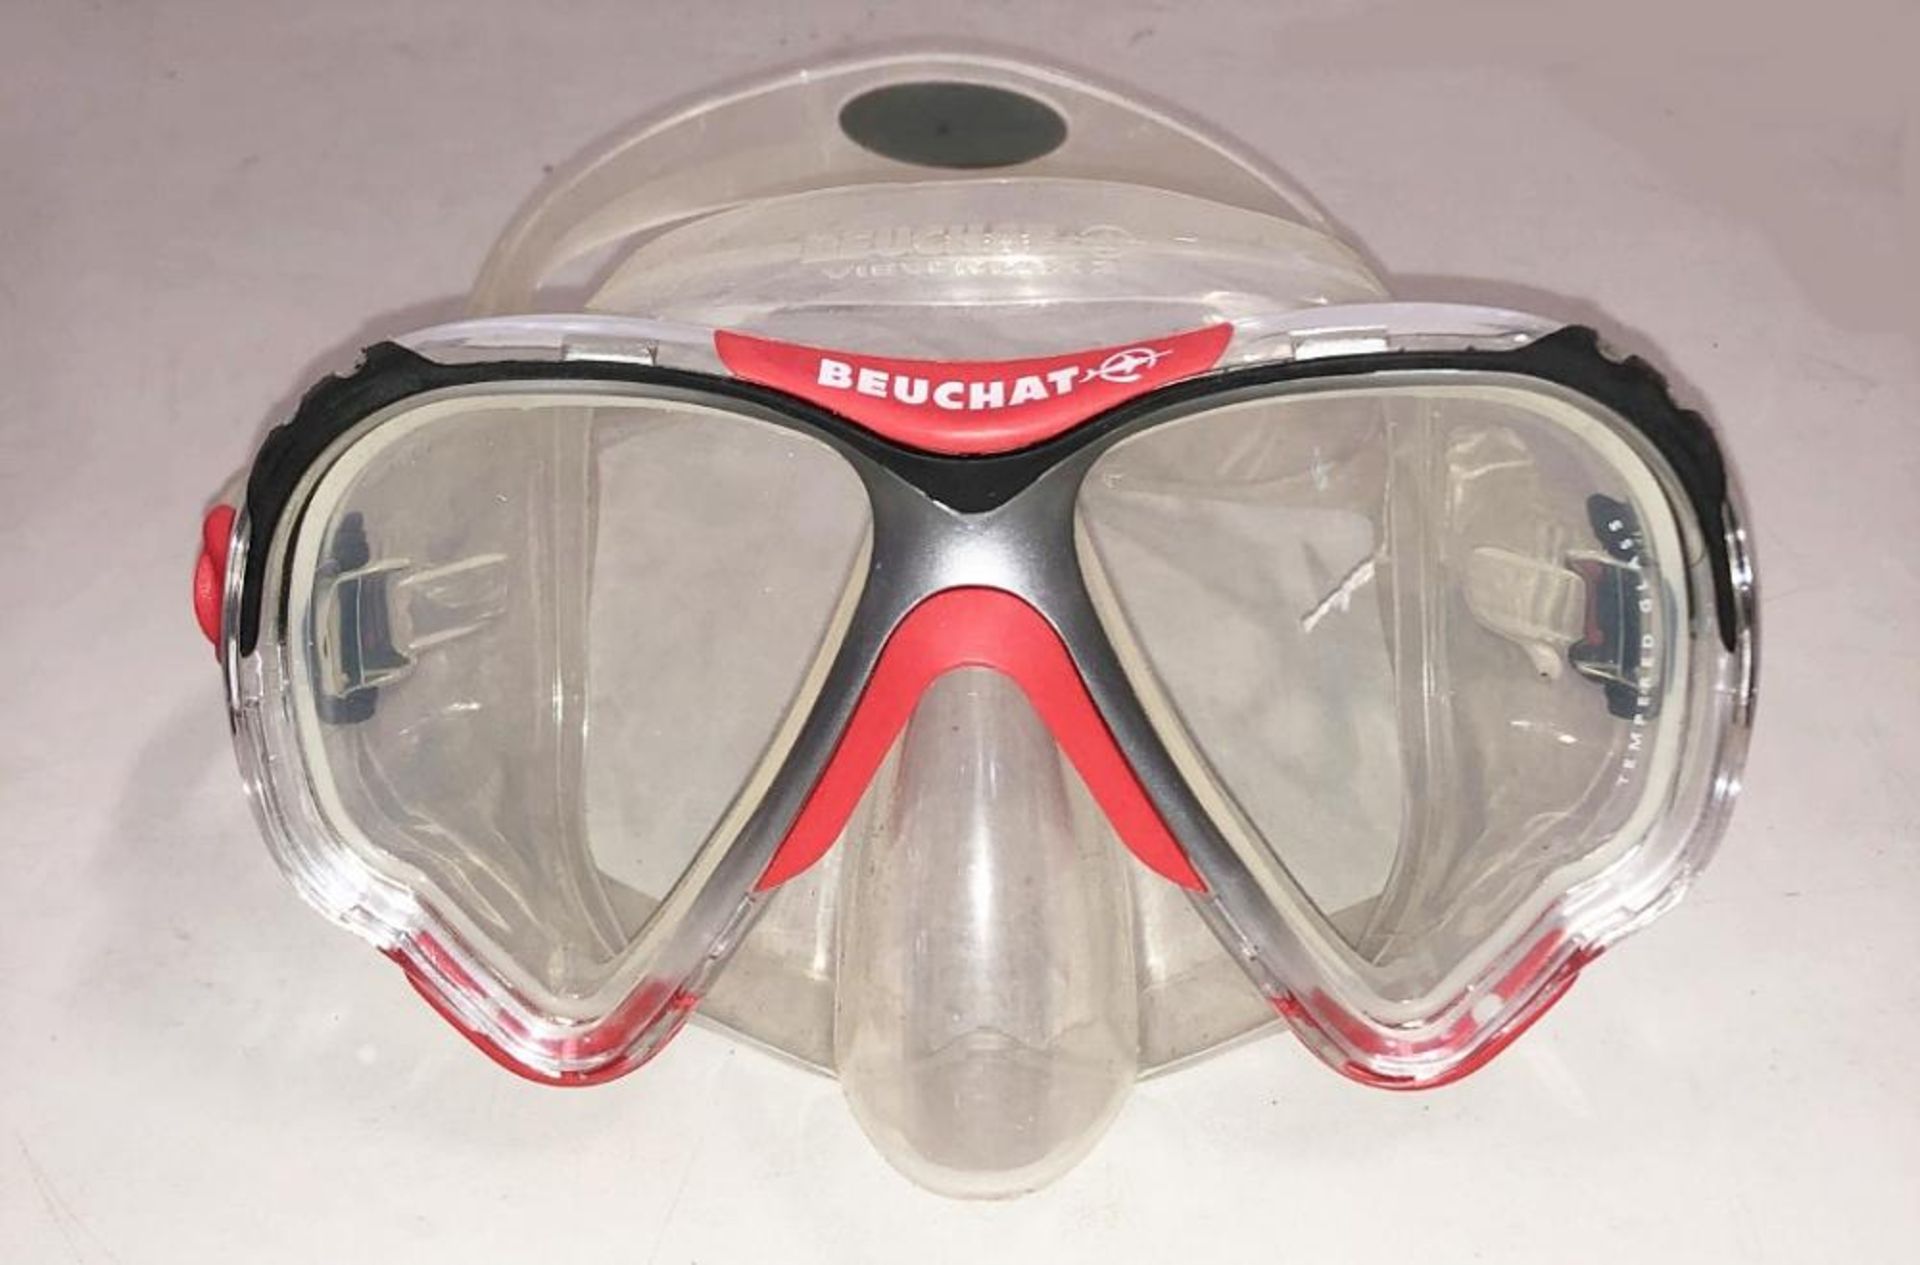 6 x New Branded Diving Masks - CL349 - Altrincham WA14 - Total RRP £187.44 - Image 5 of 20